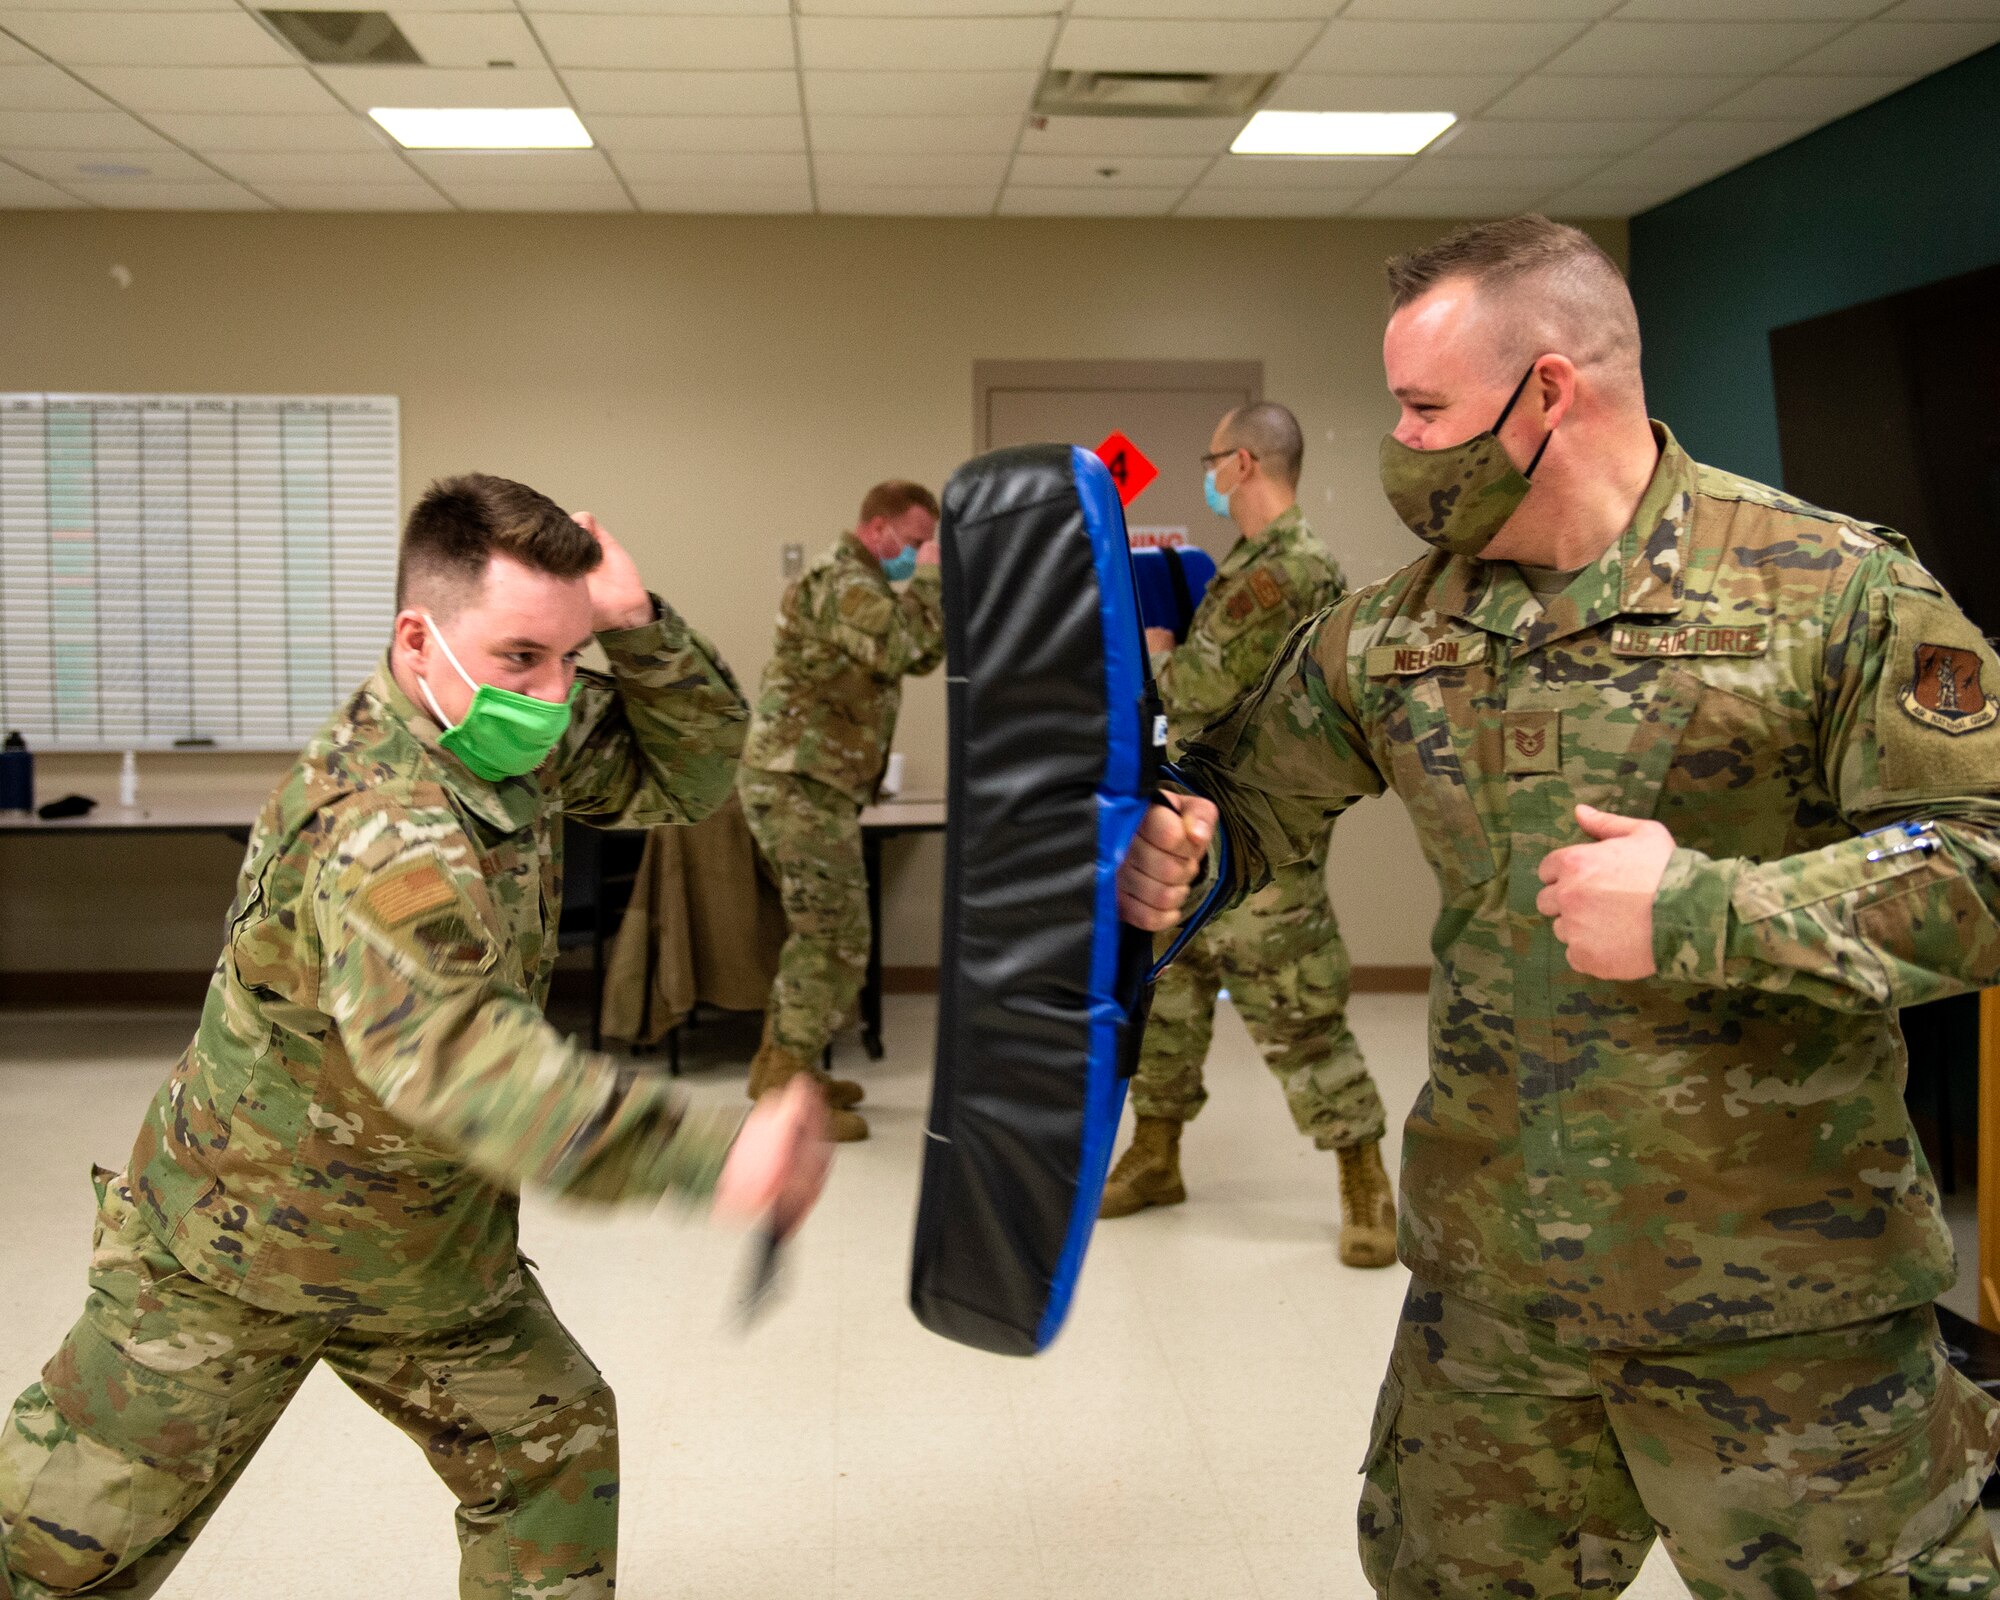 U.S. Air Force Airmen from the 133rd Airlift Wing learn the proper way to use an a collapsible baton in St. Paul, Minn., Feb. 24, 2021. The Airmen are taking part in the annual security augmentee training program, which equips base personnel with the fundamentals skills required to assist Security Forces if called upon.